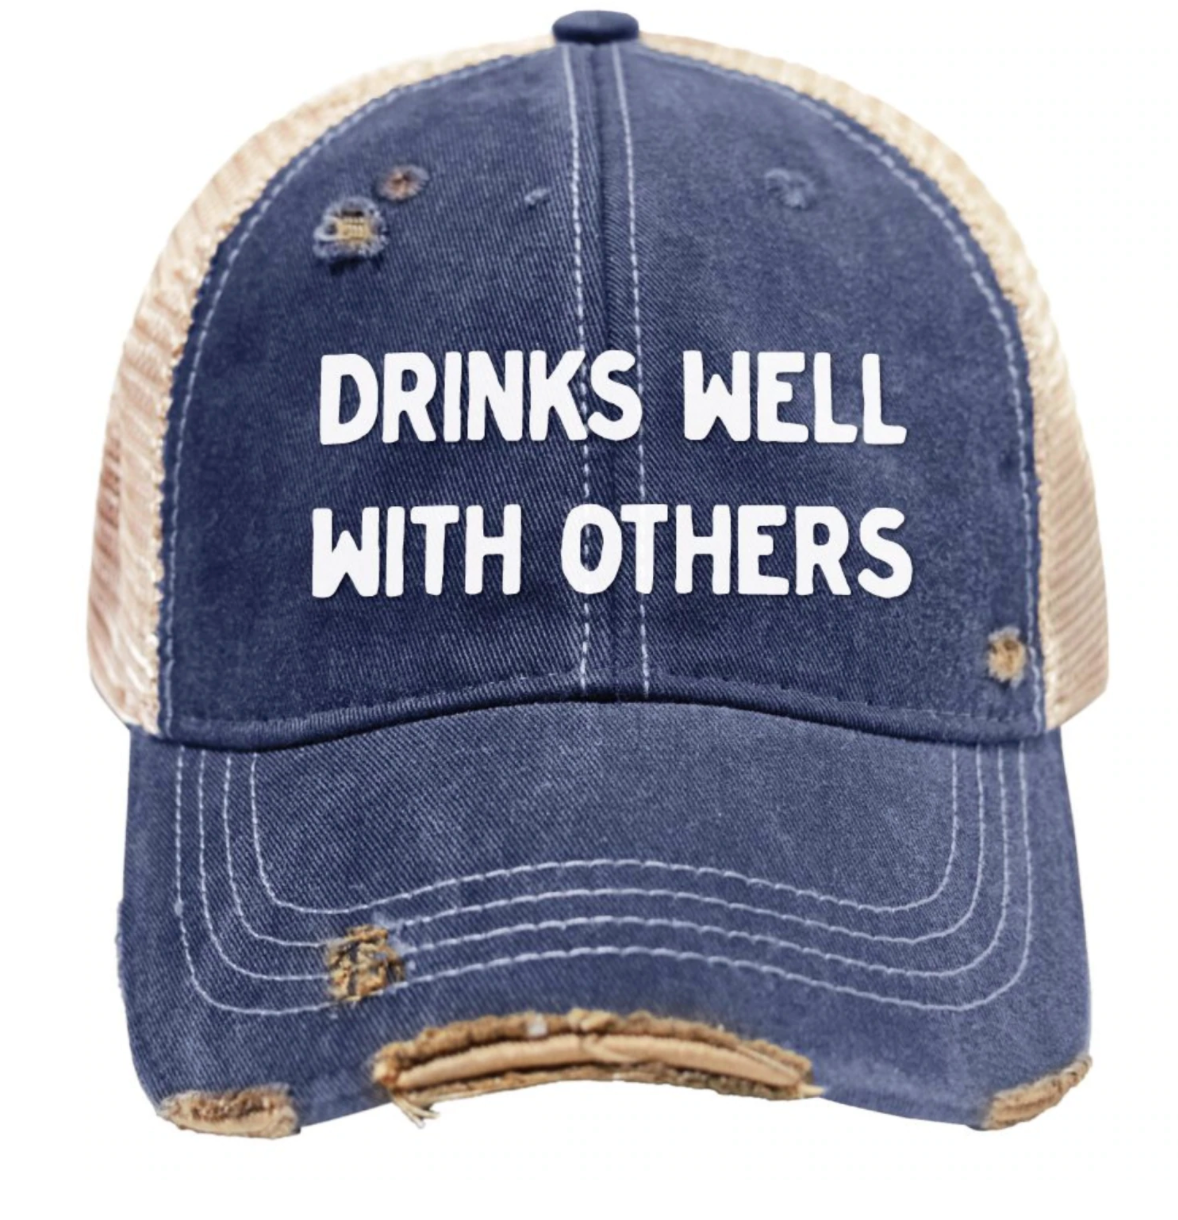 Drinks Well With Others Snap Back Trucker Cap